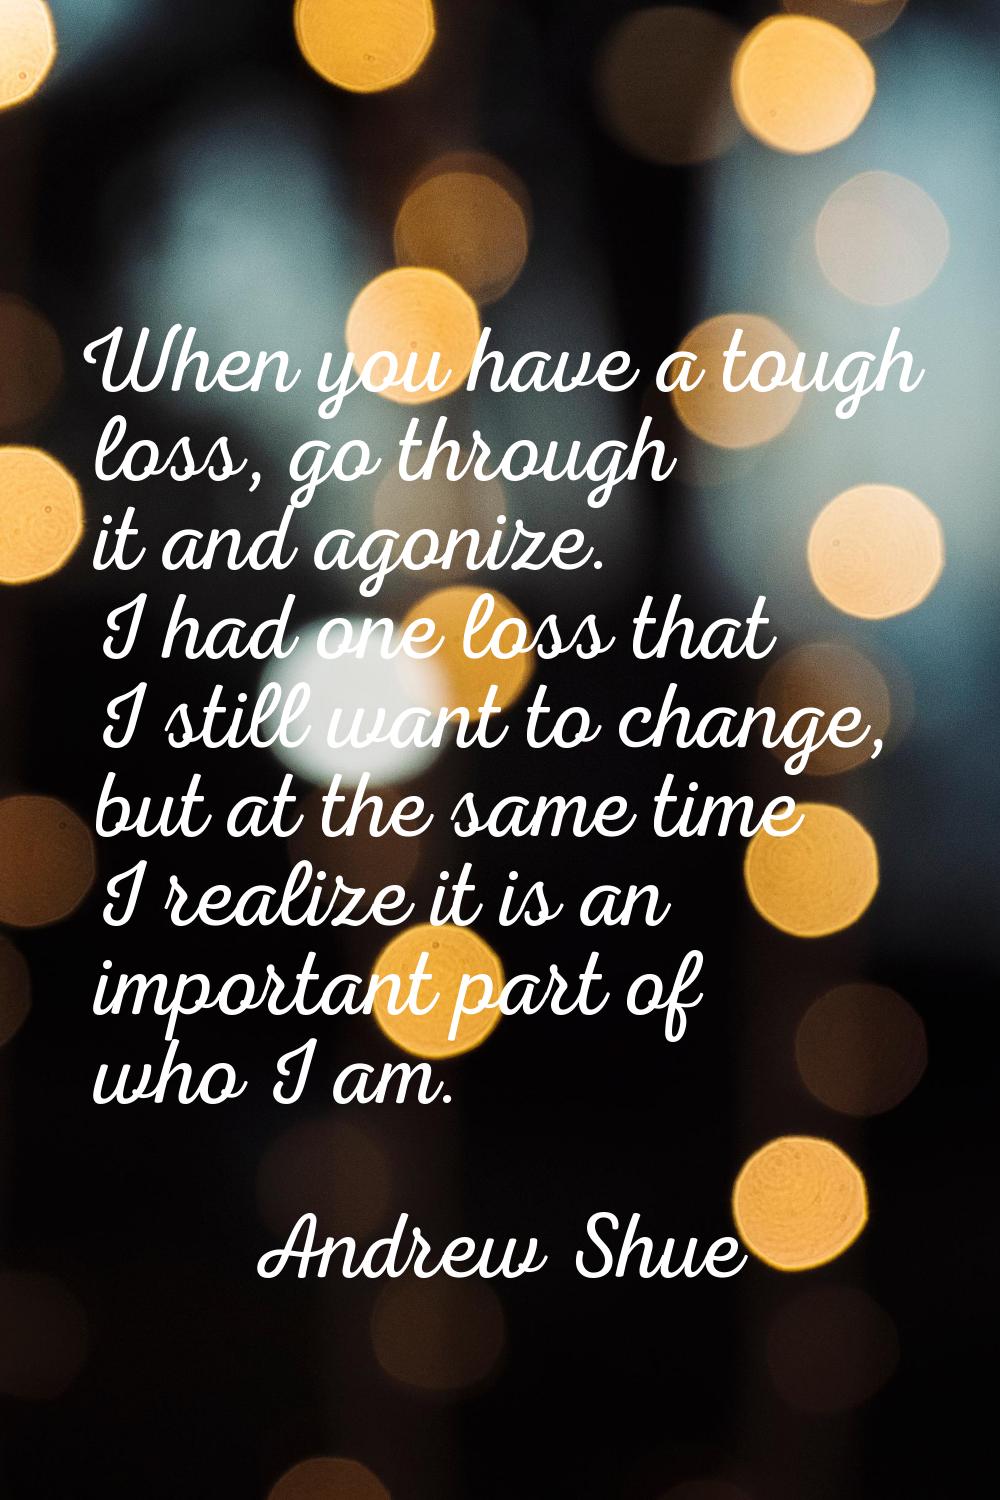 When you have a tough loss, go through it and agonize. I had one loss that I still want to change, 